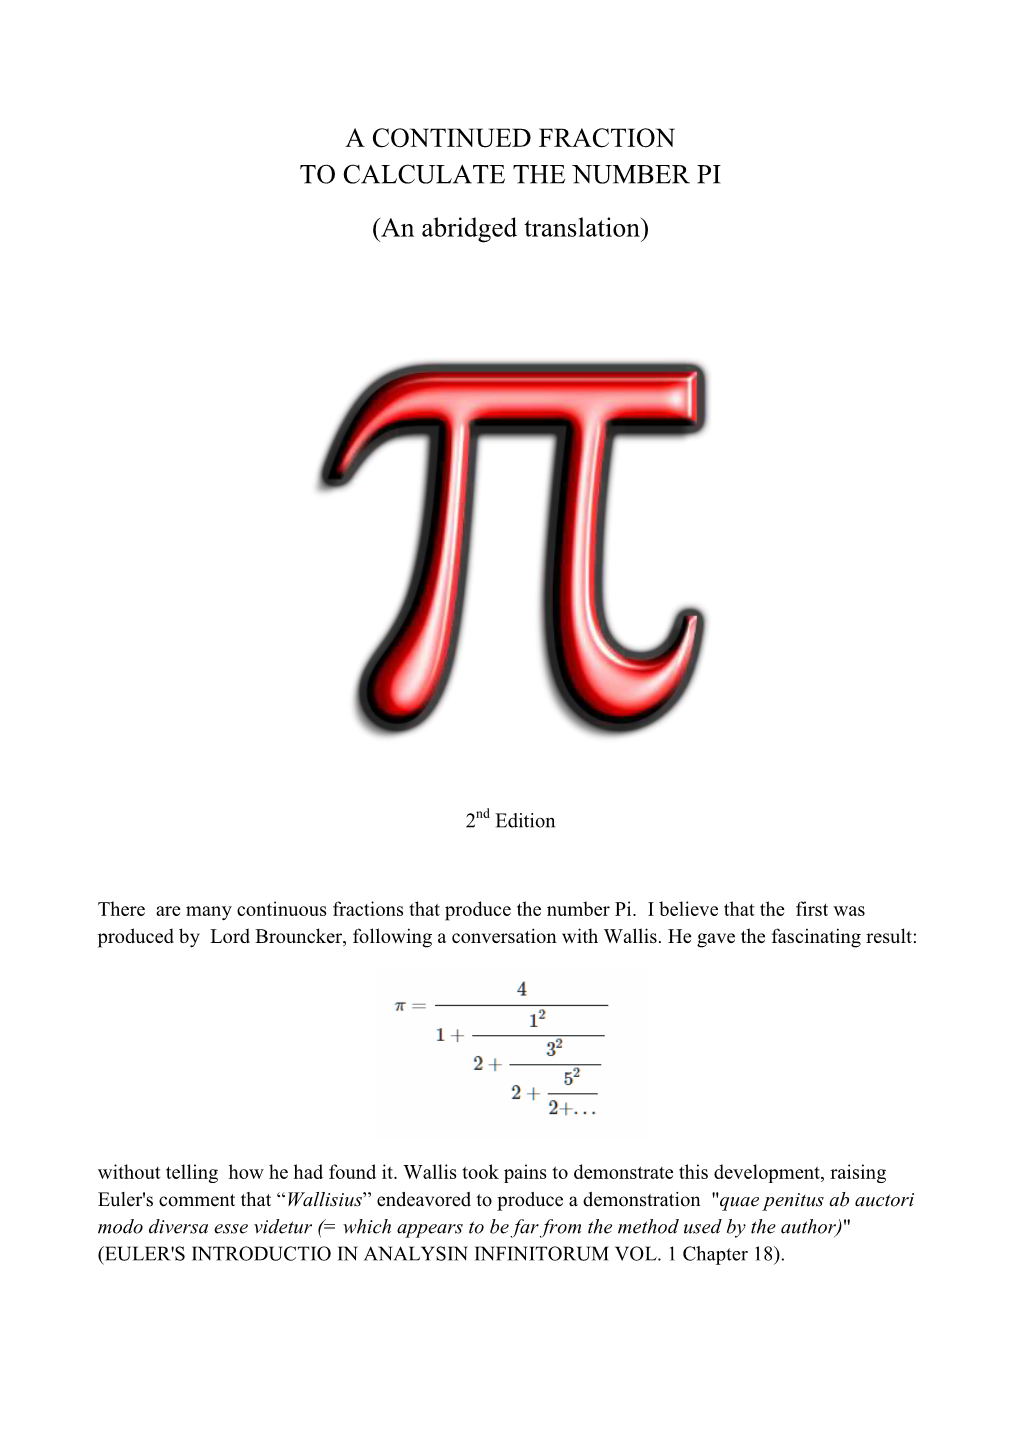 A CONTINUED FRACTION to CALCULATE the NUMBER PI (An Abridged Translation)